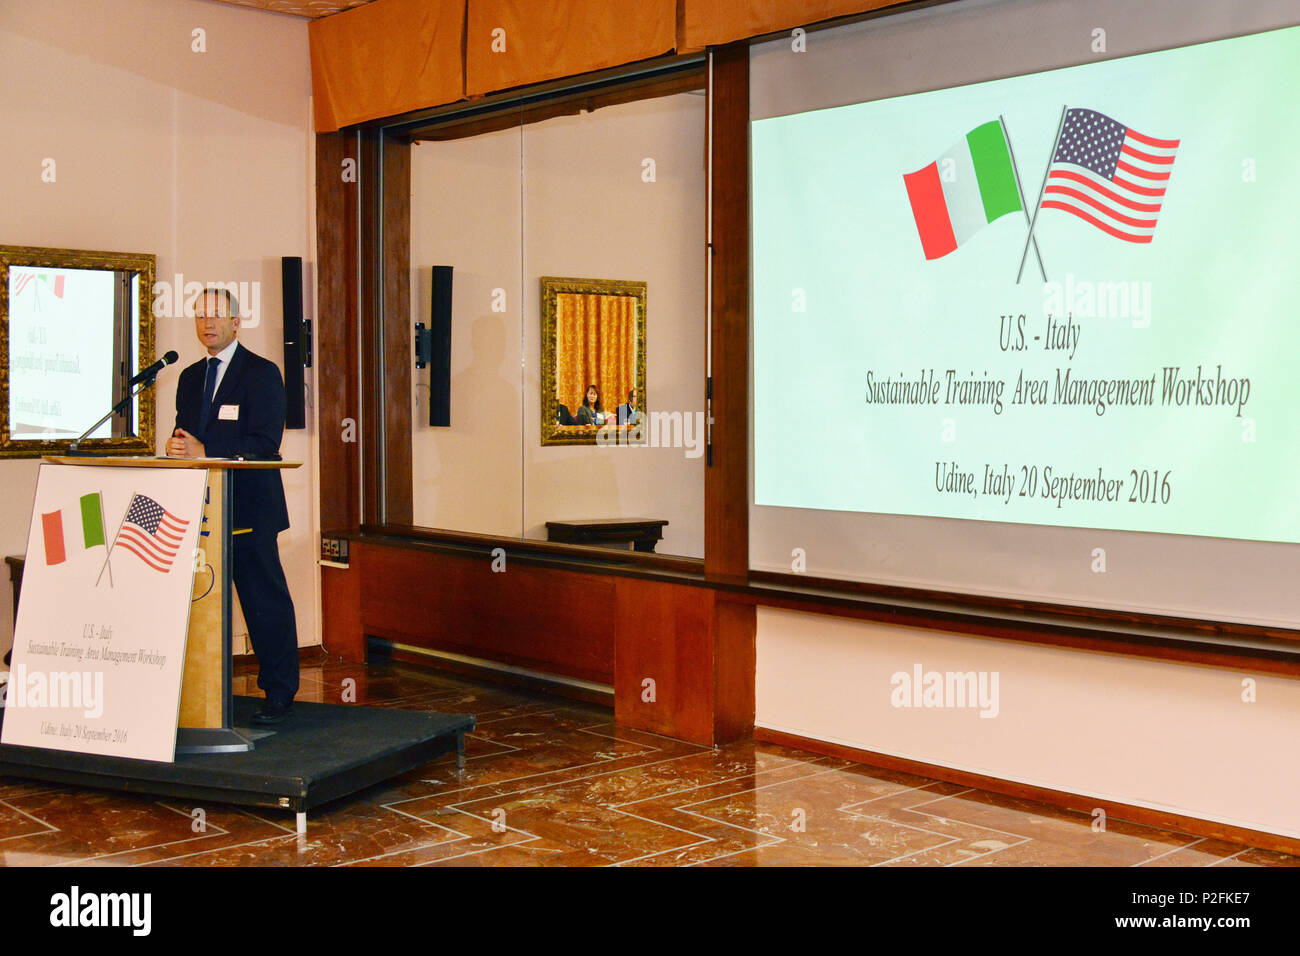 Nate Whelan , U.S. Army Europe Integrated Training Area Management (ITAM) Program Manager, Training Support Activity Europe, 7th Army Training Command, addresses members of United States Army, the Italian Army, Italian authorities and Italian Civilians from 12th Infrastructure Command, on Sustainable Training Area Management Programs, in Udine, Italy, 20 Sept. 2016. (U.S. Army photo by Visual Information Specialist Paolo Bovo/Released) Stock Photo